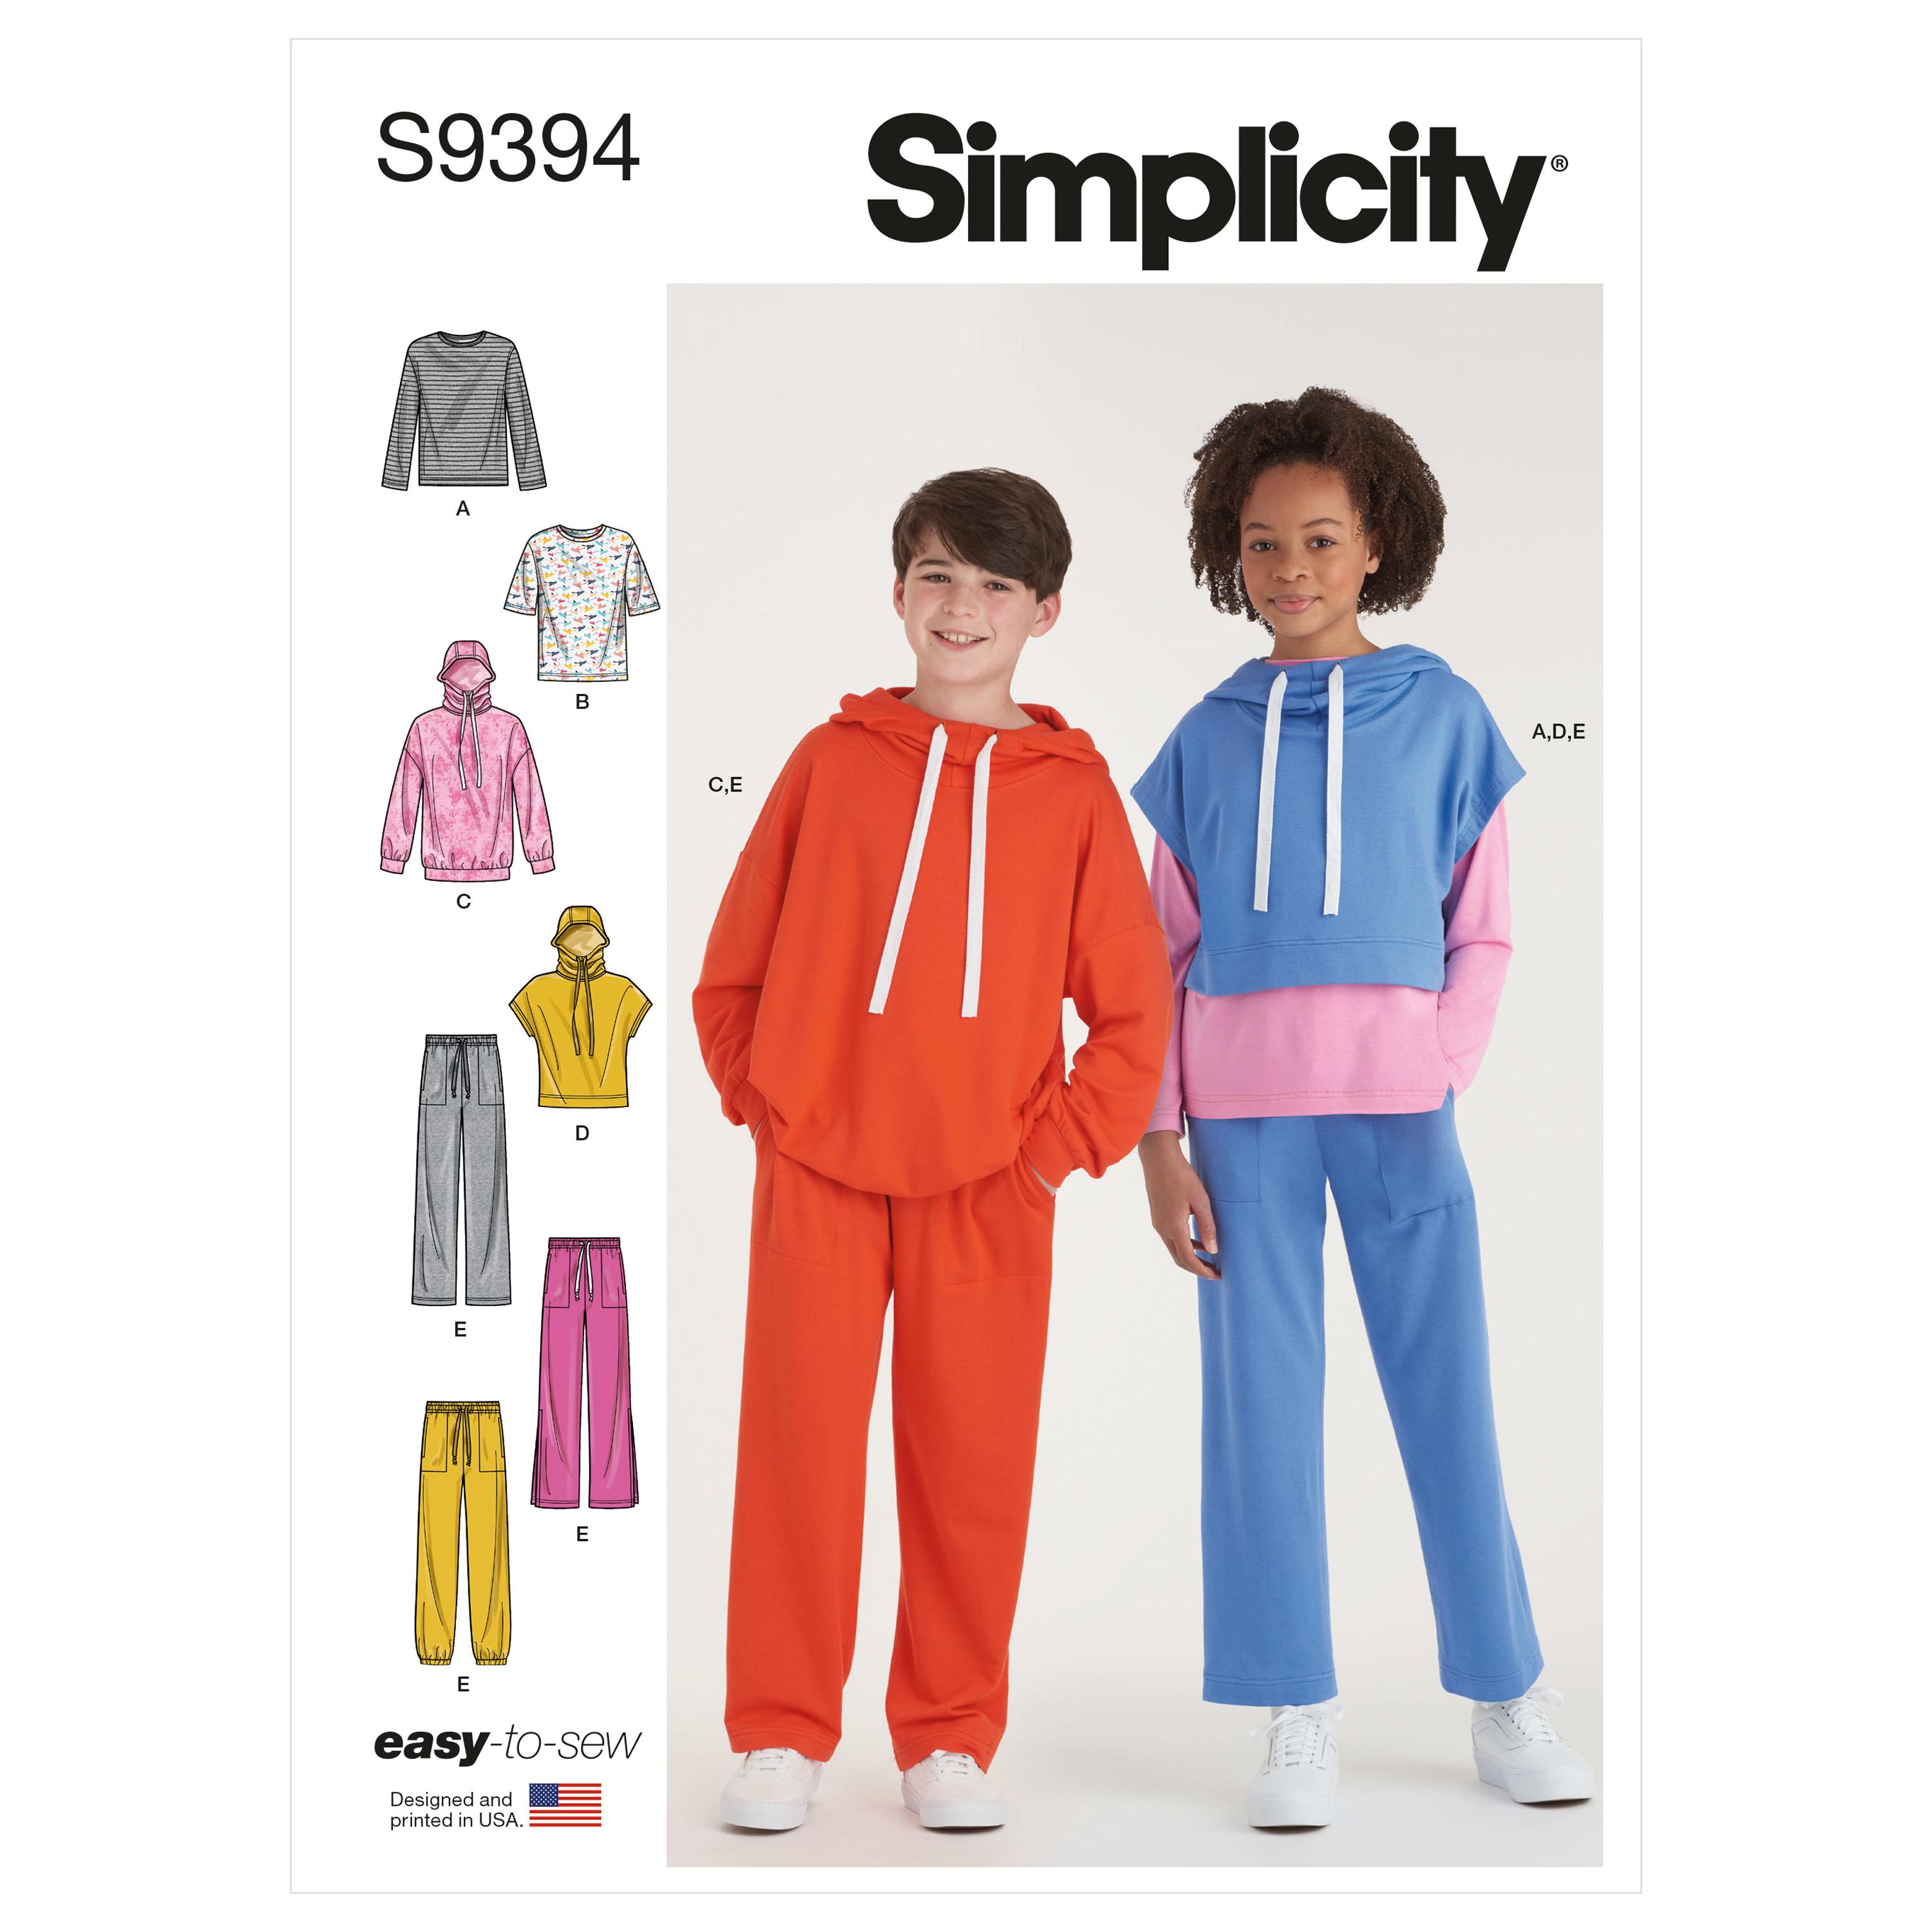 Simplicity Sewing Pattern S9394 Boys' and Girls' Oversized Knit Hoodies, Pants and Tops